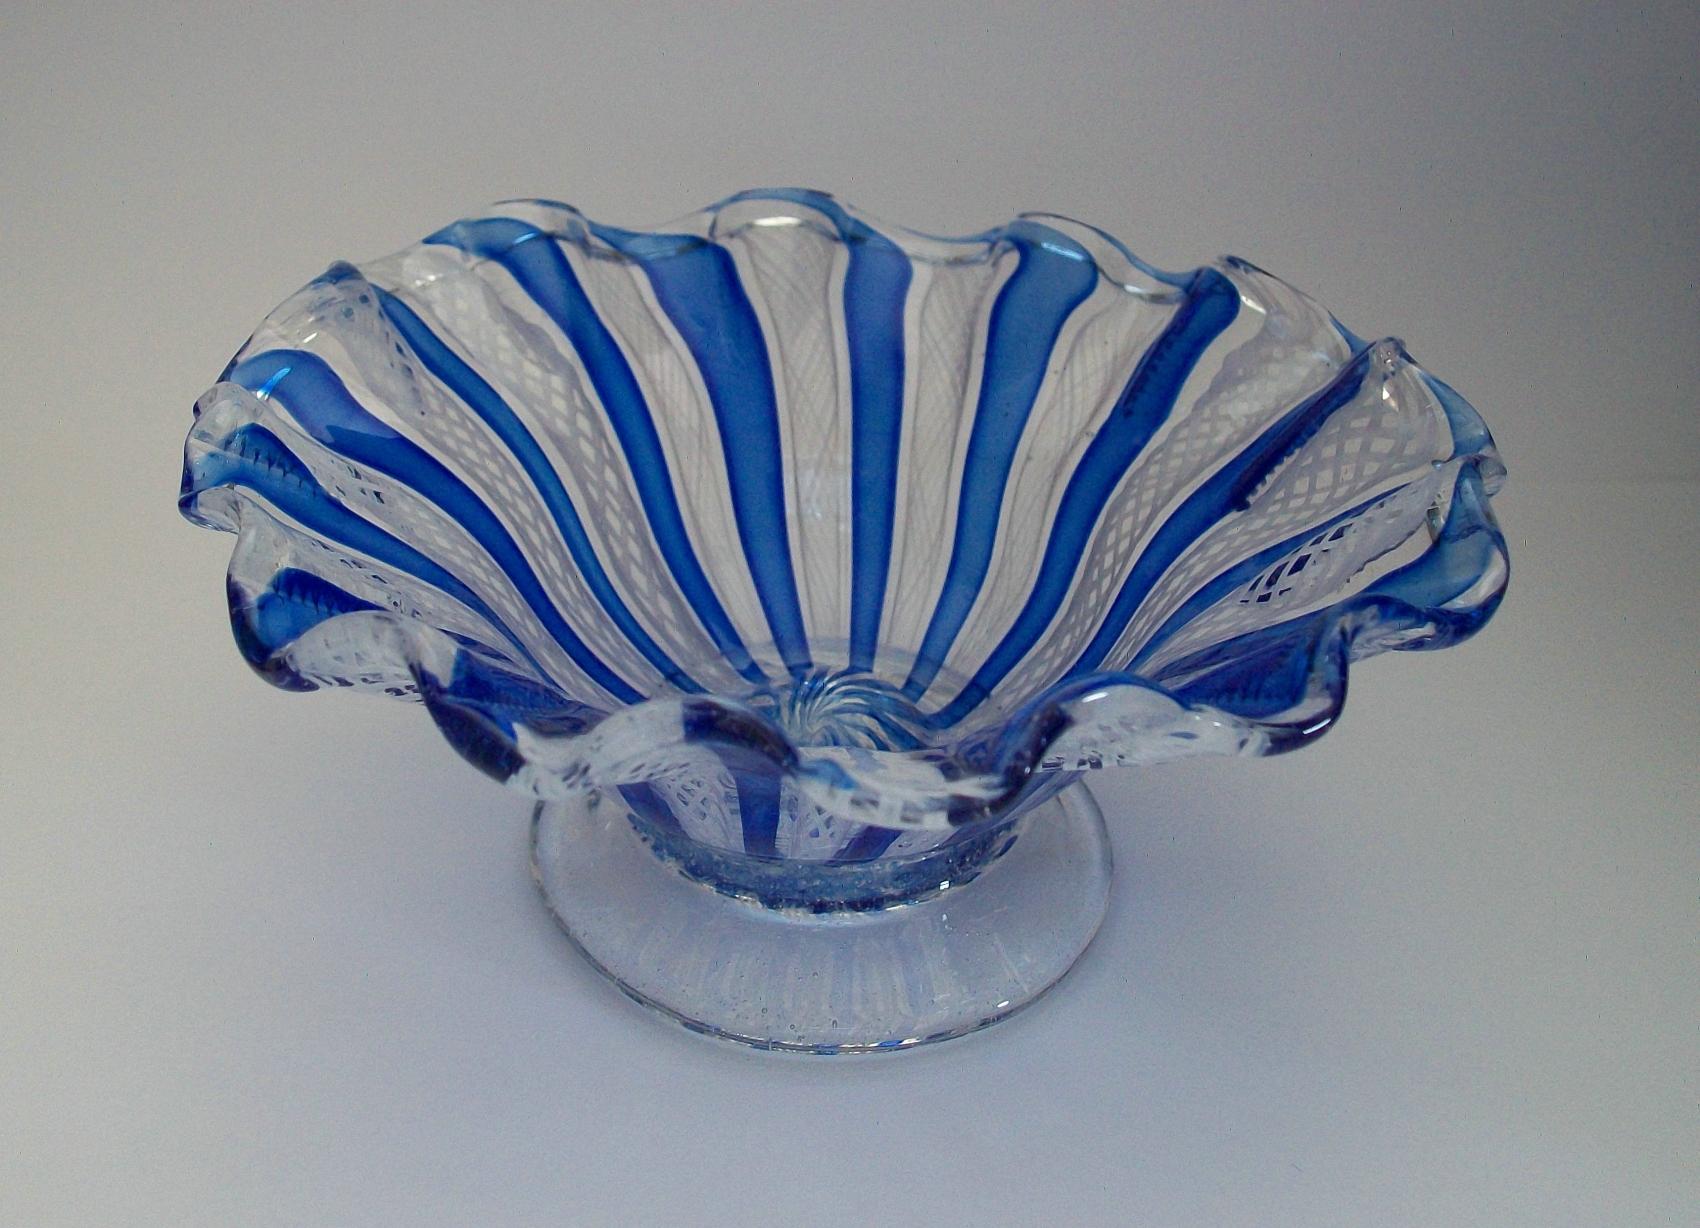 Hand-Crafted Murano Latticino & Blue Ribbon Footed Bowl - Unsigned - Italy - Mid 20th Century For Sale